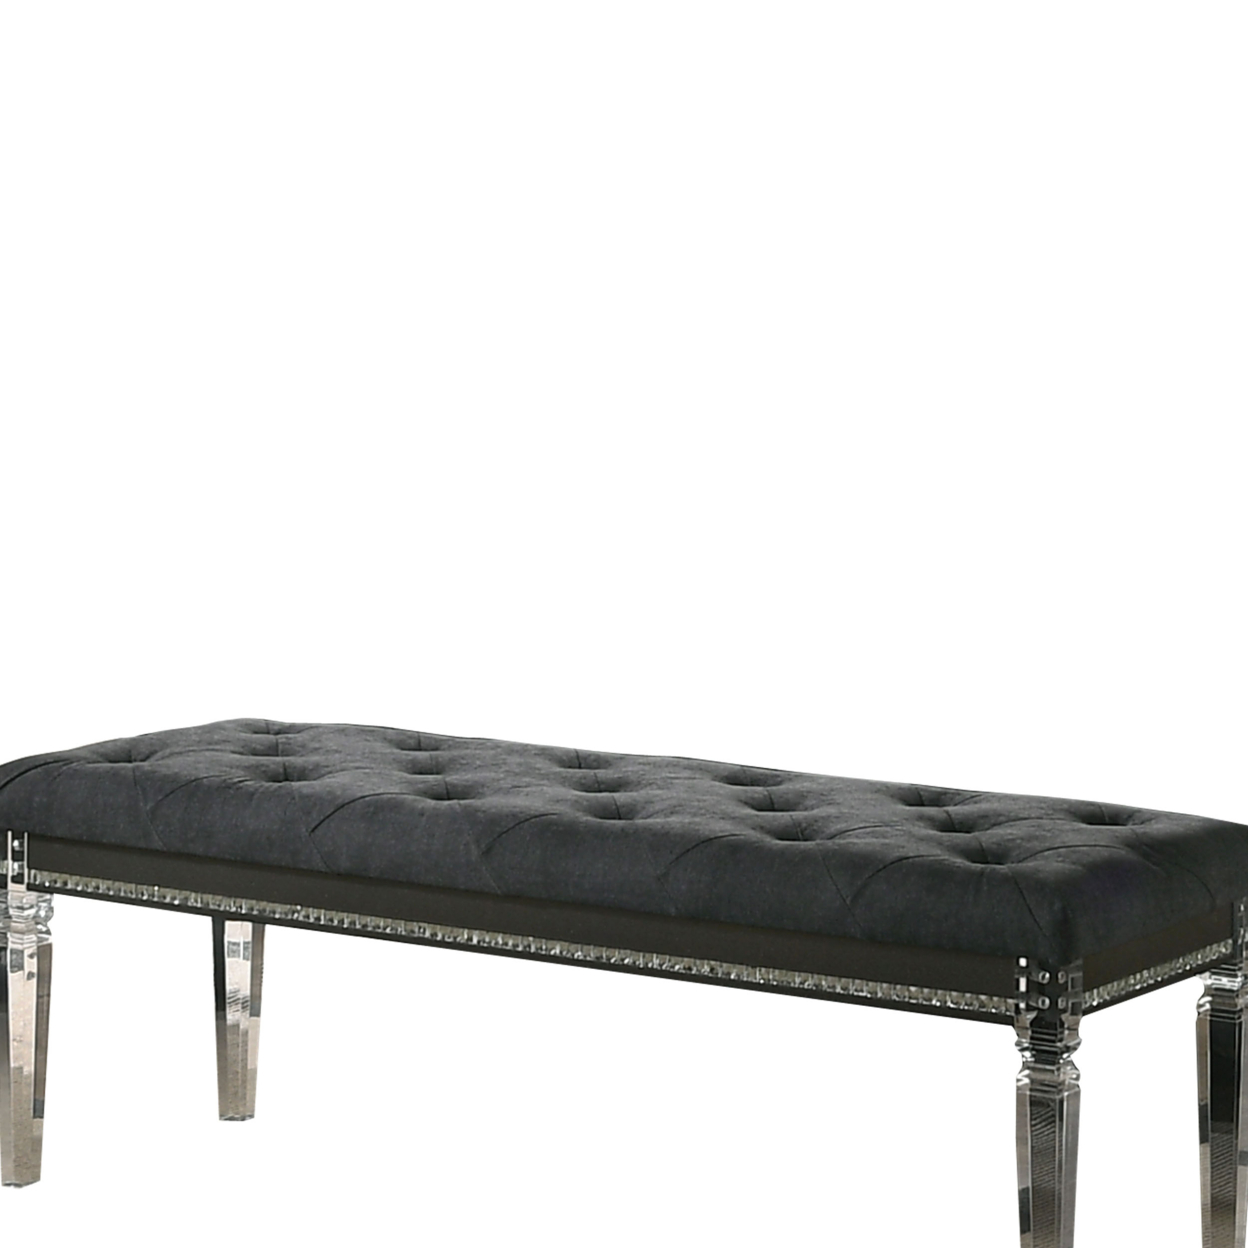 Faux Crystal Inlay Bench With Tufted Seating And Acrylic Legs, Dark Gray- Saltoro Sherpi